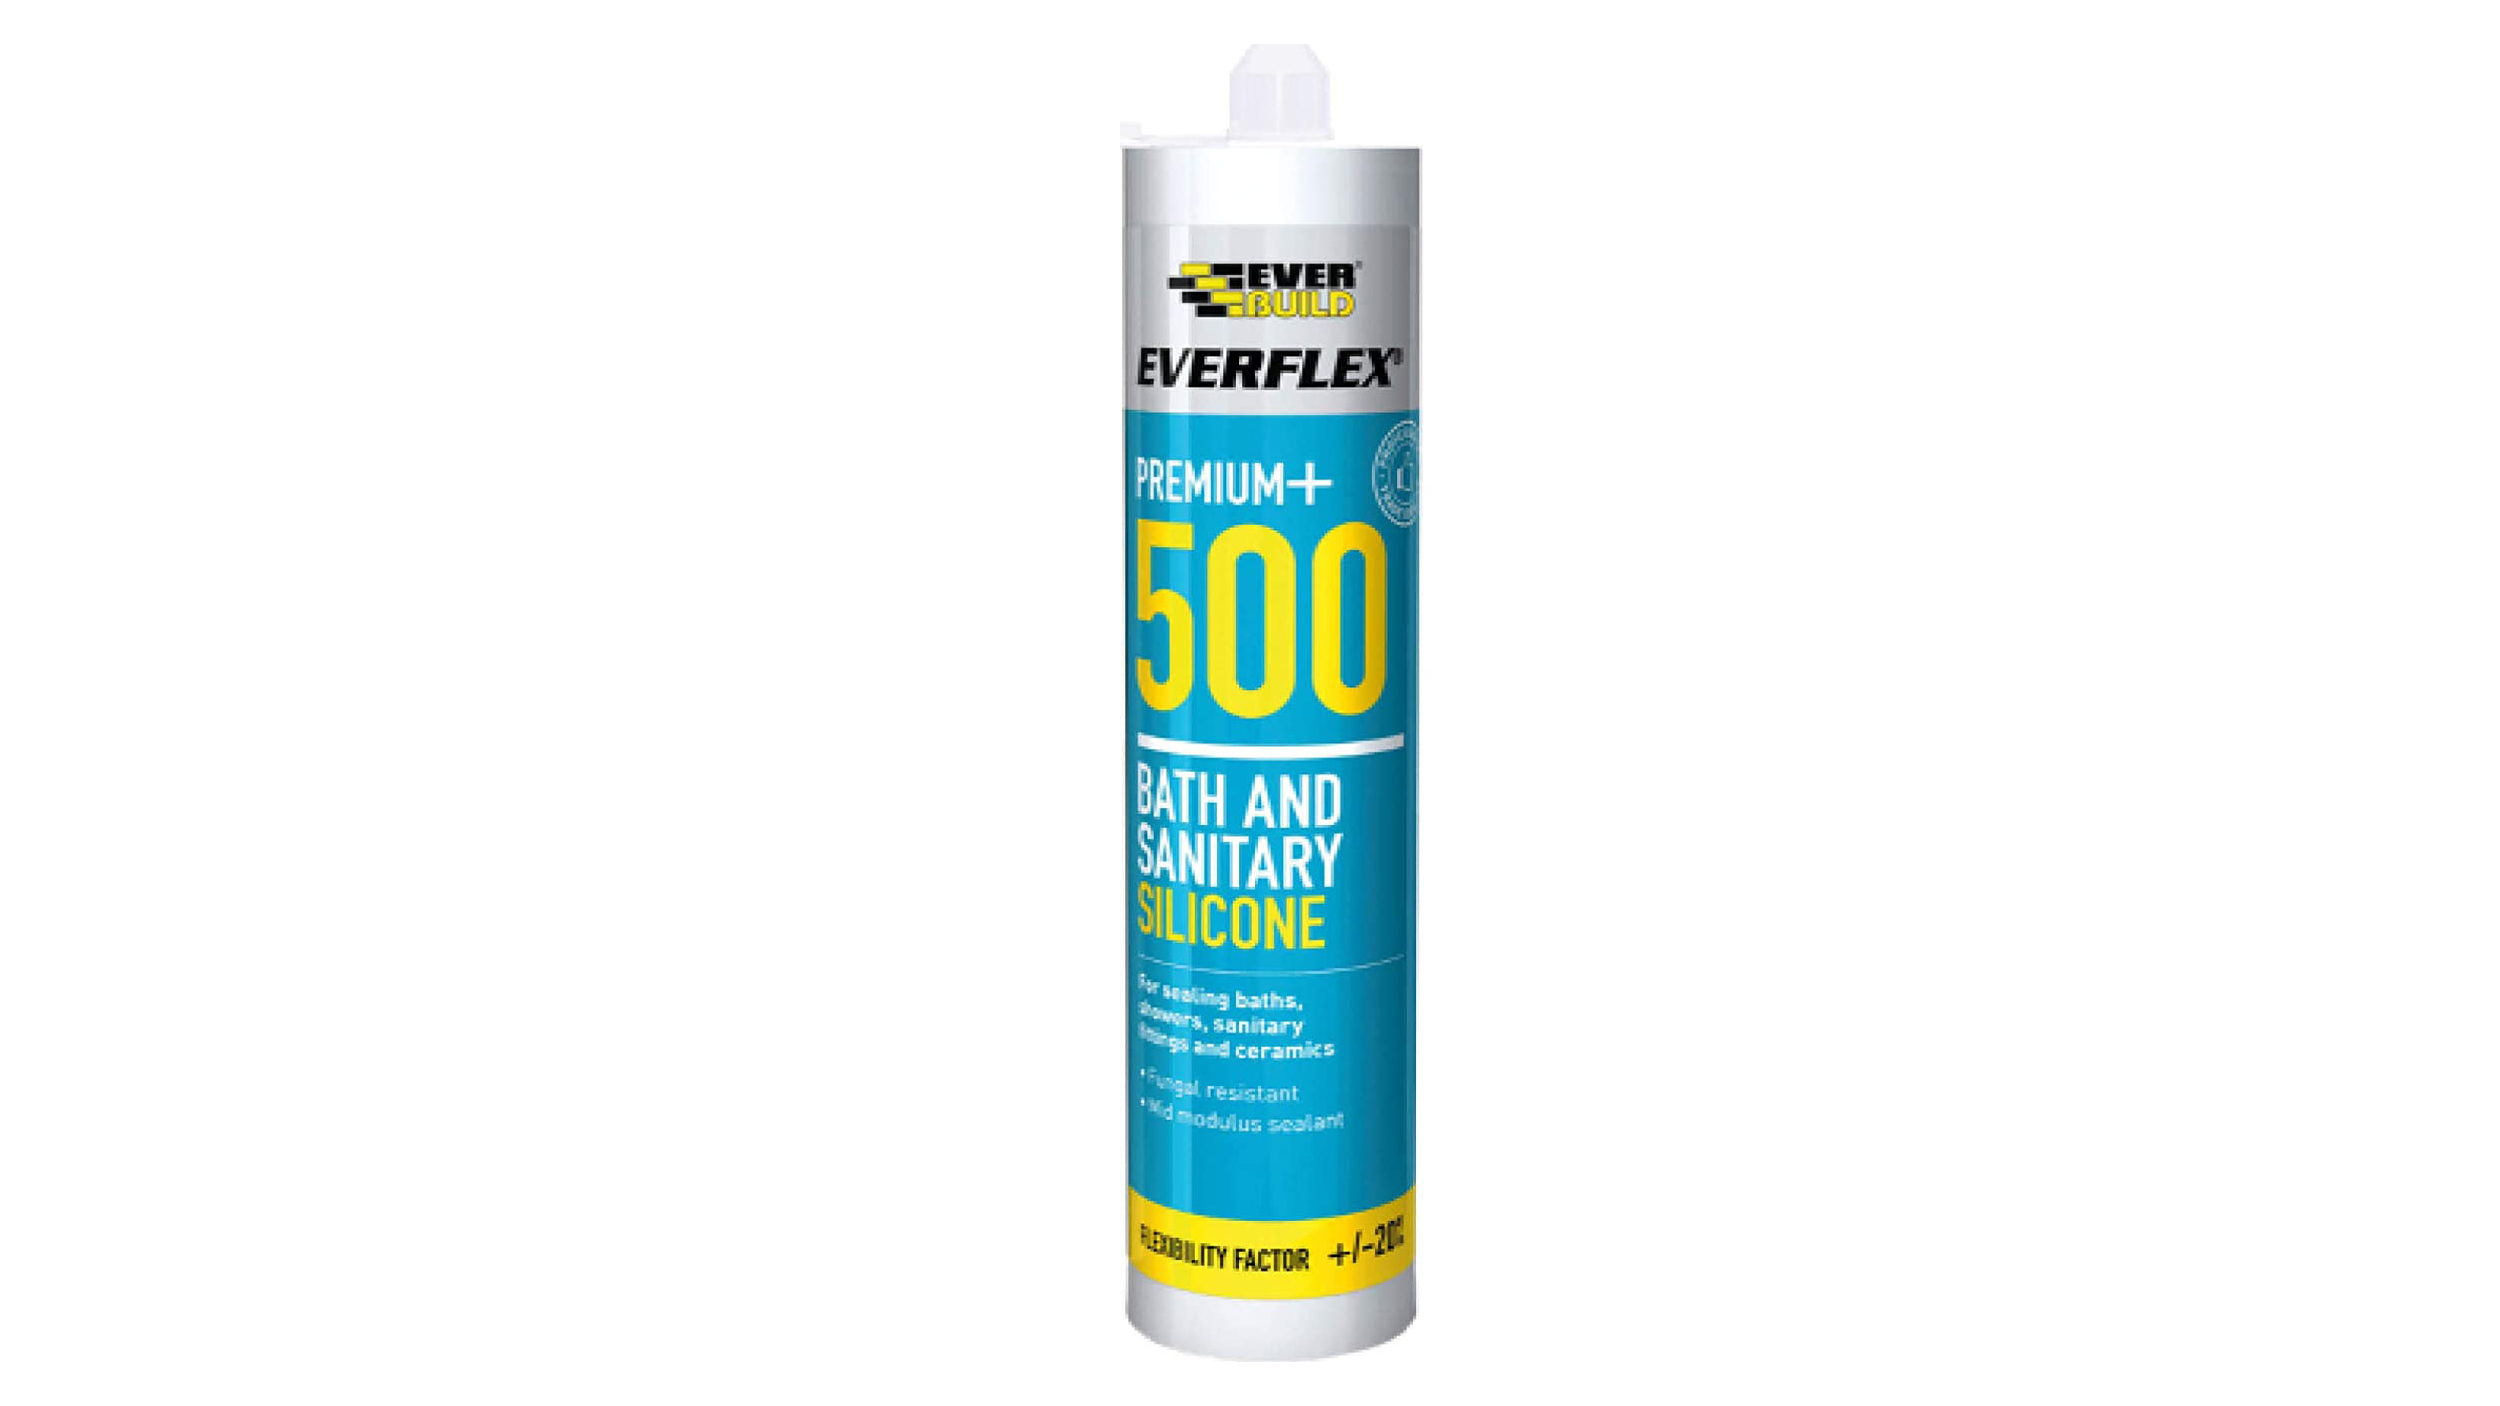 The Everflex 500 Bath & Sanitary Silicone is one of the best bathroom sealants